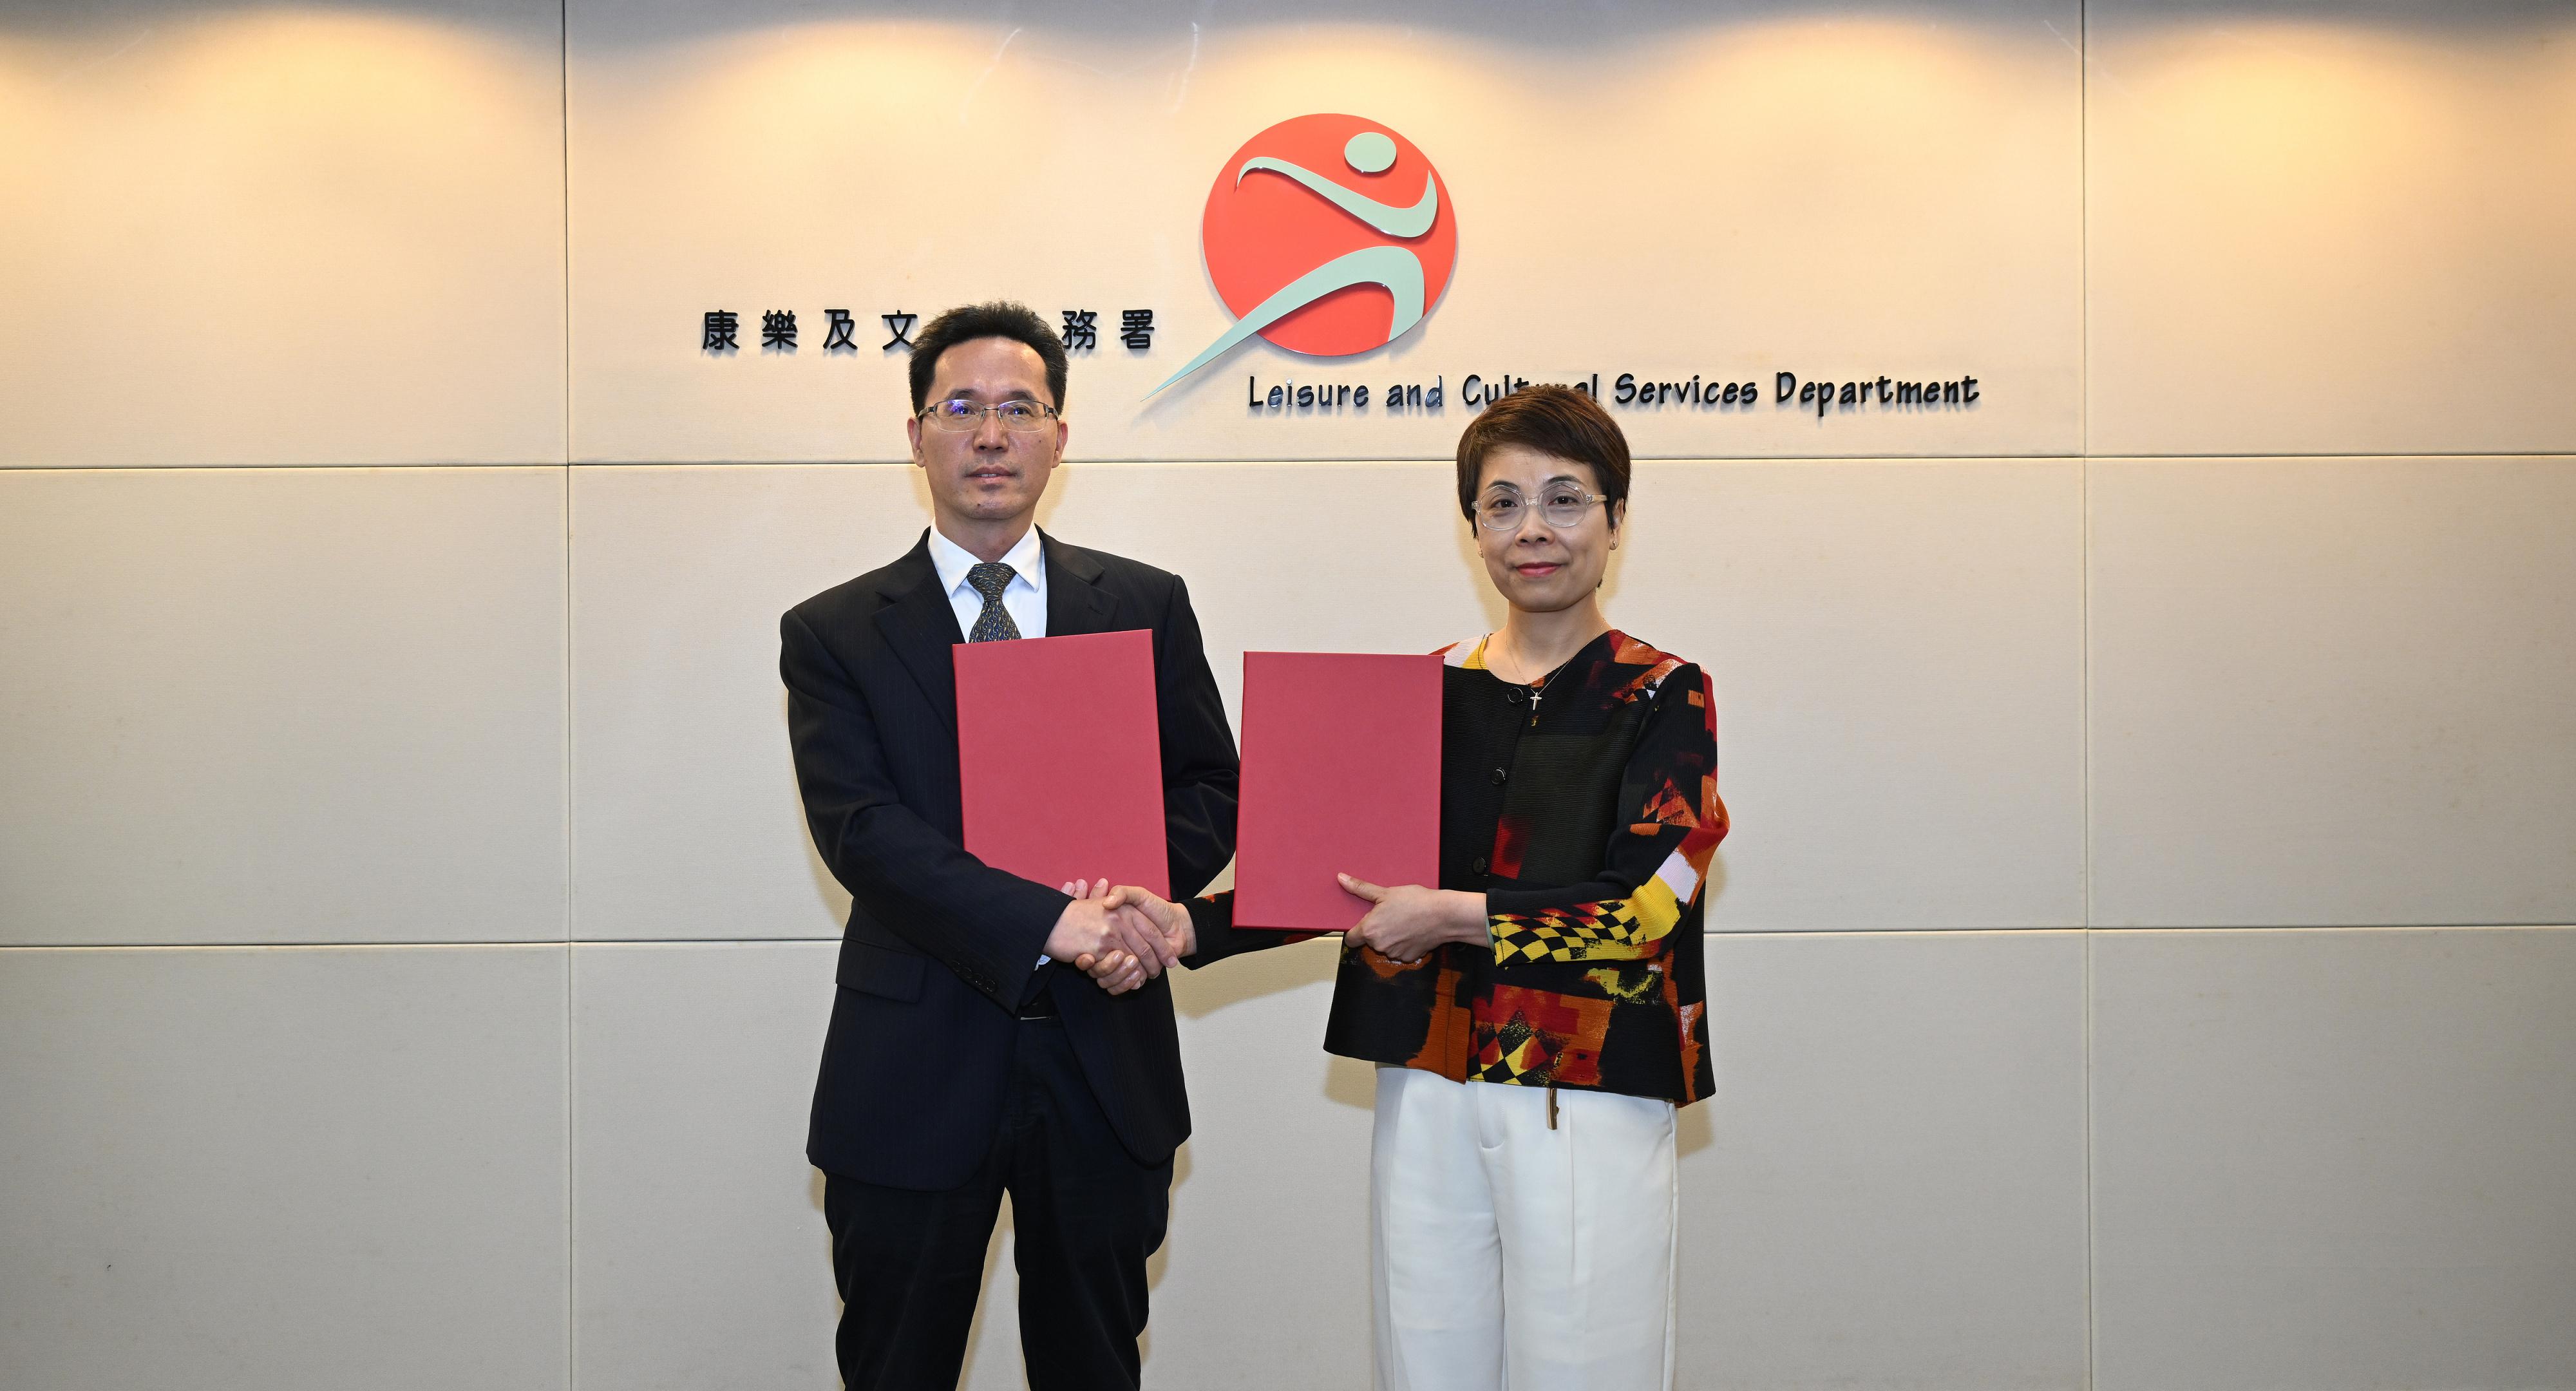 The Leisure and Cultural Services Department and the Henan Provincial Administration of Cultural Heritage today (September 25) signed the second Letter of Intent on Cultural Exchange and Co-operation, with an aim of strengthening cultural exchange and collaboration between the two sides. The Acting Director of Leisure and Cultural Services, Ms Eve Tam (right), and the Director of the Henan Provincial Administration of Cultural Heritage, Dr Ren Wei (left), are pictured at the signing ceremony.